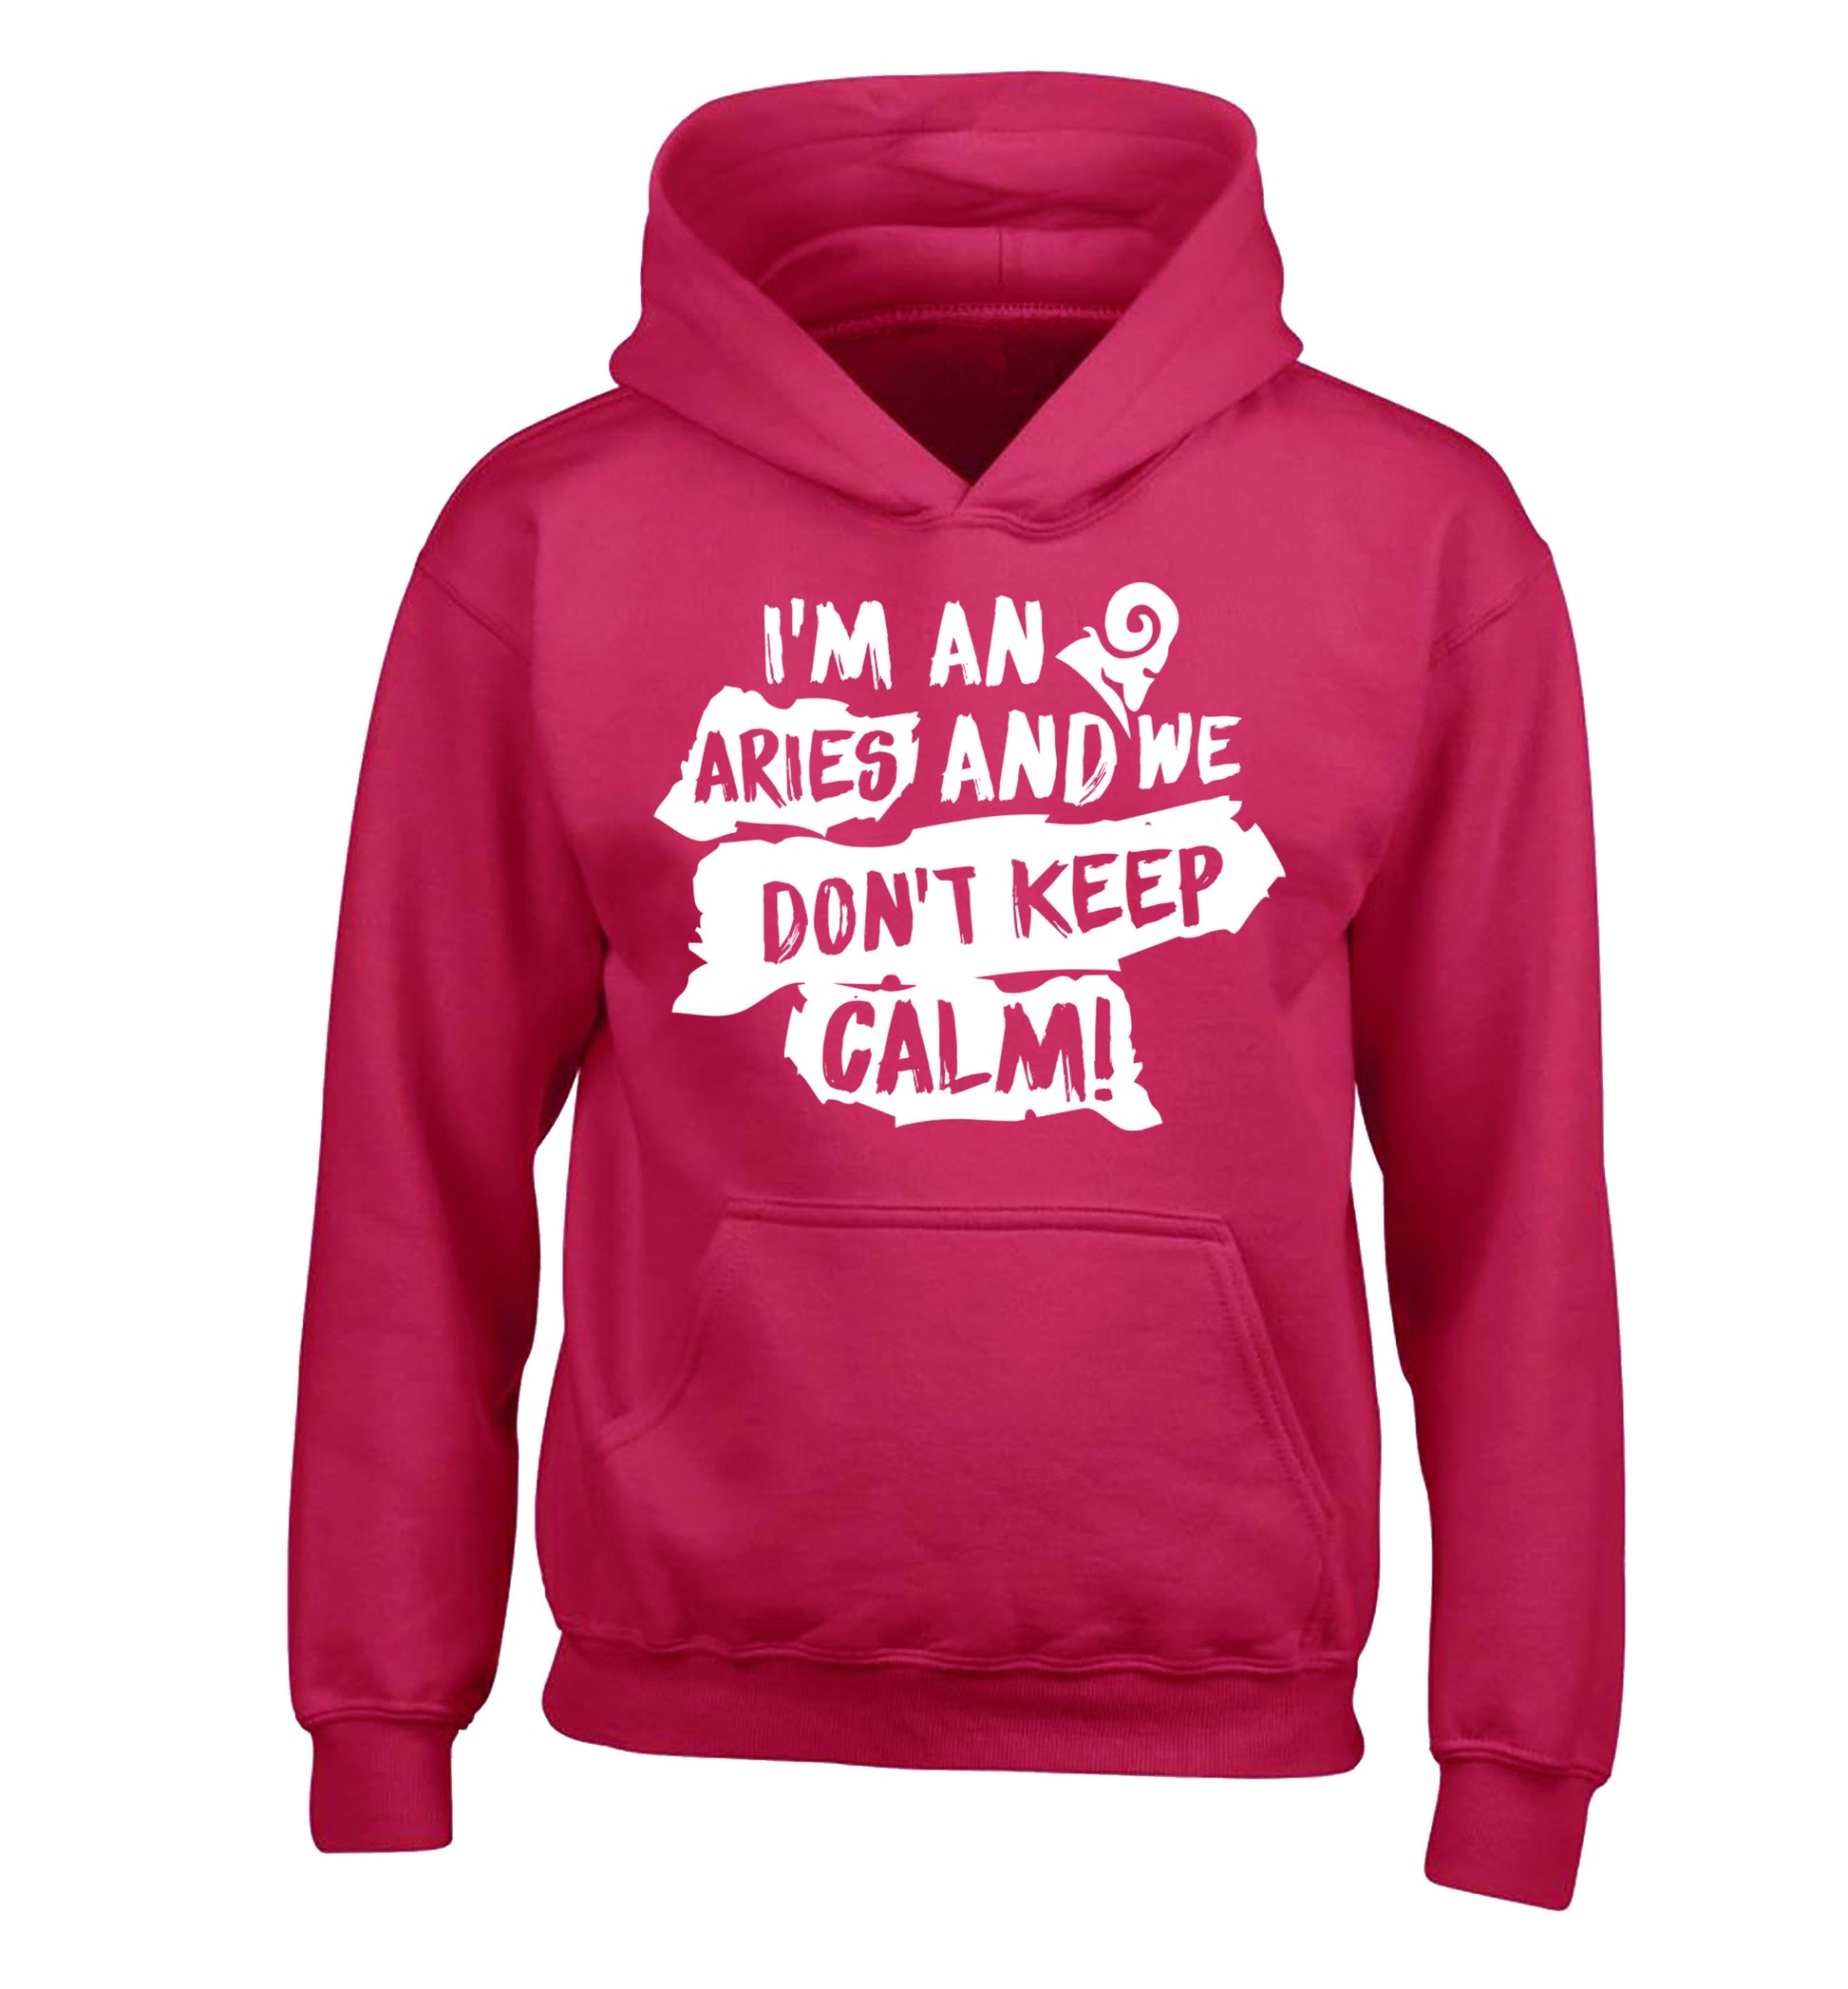 I'm an aries and we don't keep calm children's pink hoodie 12-13 Years